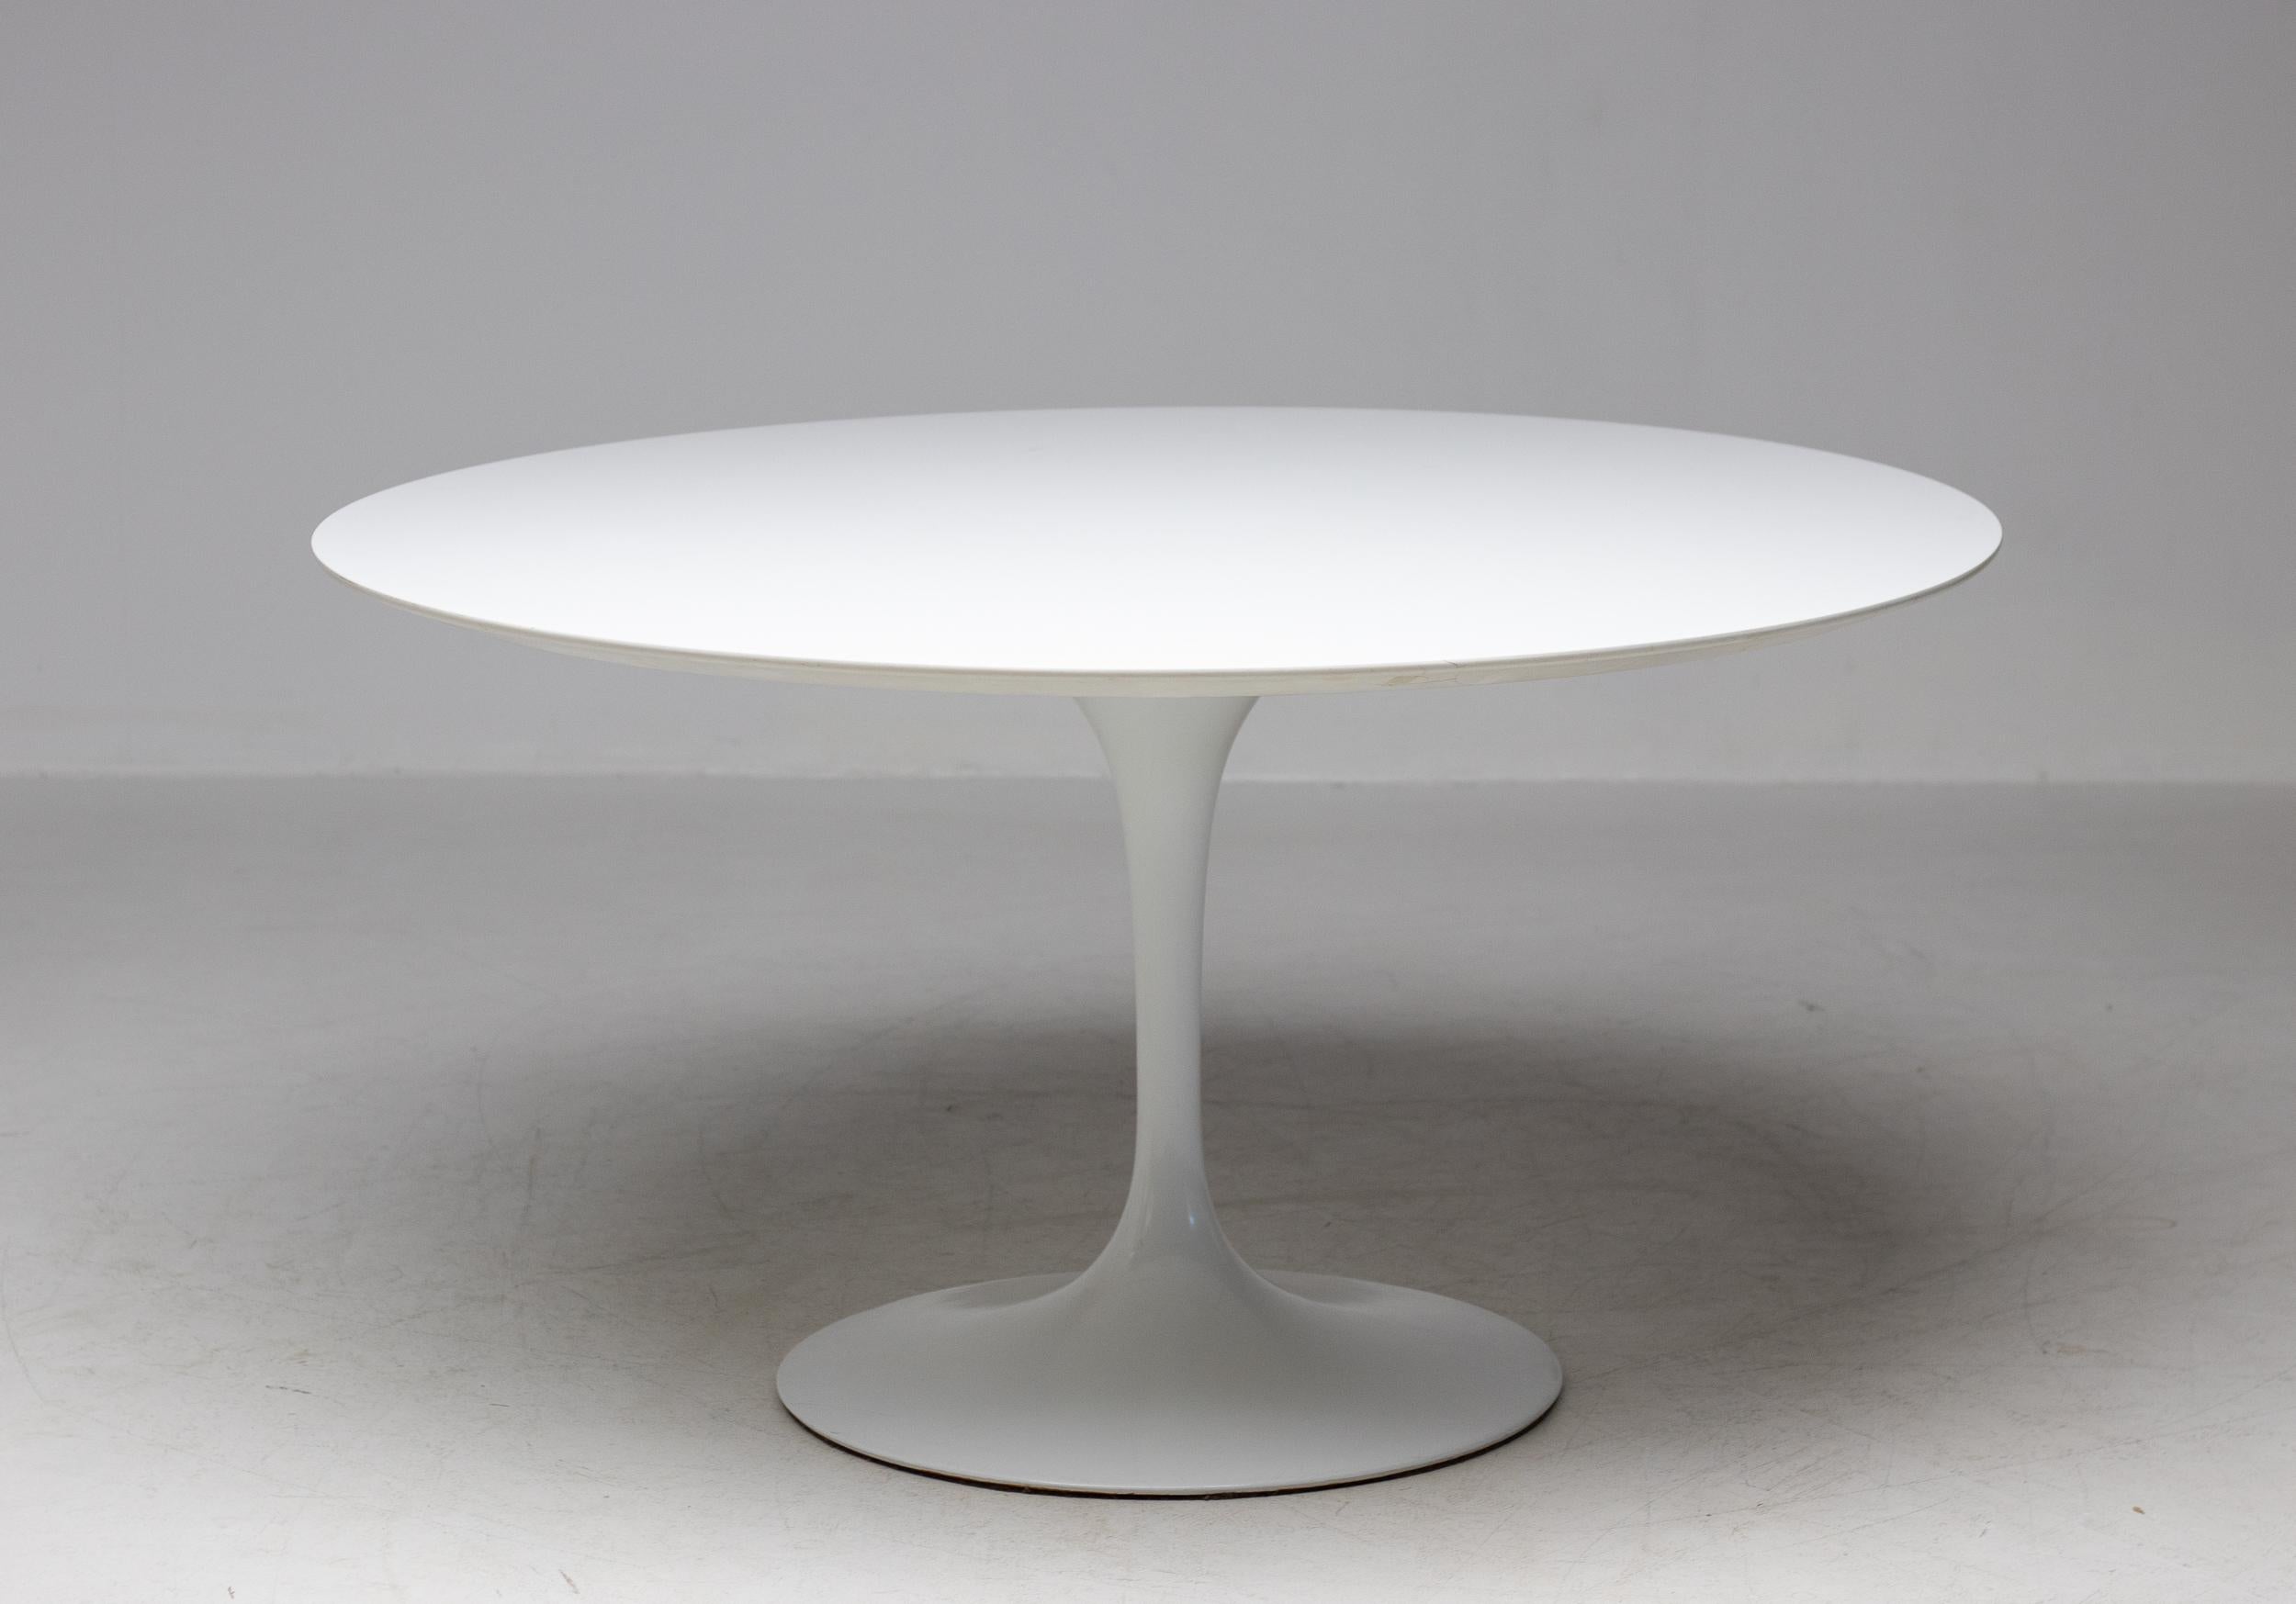 Classic large white Tulip dining table with 5 Tulip chairs designed by Eero Saarinen for Knoll International.
A defining accomplishment of modern design and a timeless addition to your home—a true Classic.
Logo embossed in pedestal bottom. Knoll tag